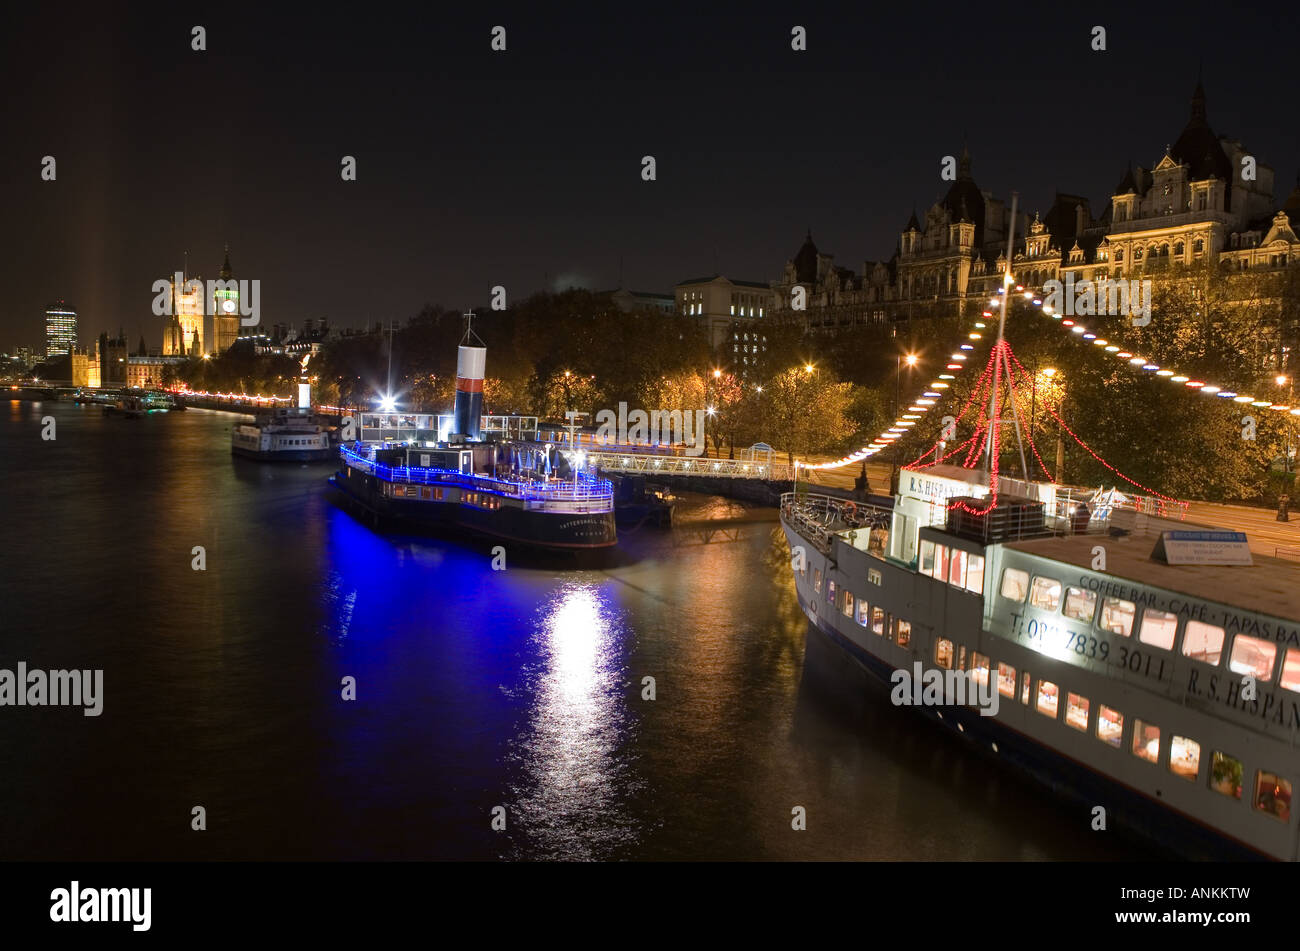 Floating pub and restaurants docked along the River Thames in front of Big Ben in London, England. Stock Photo